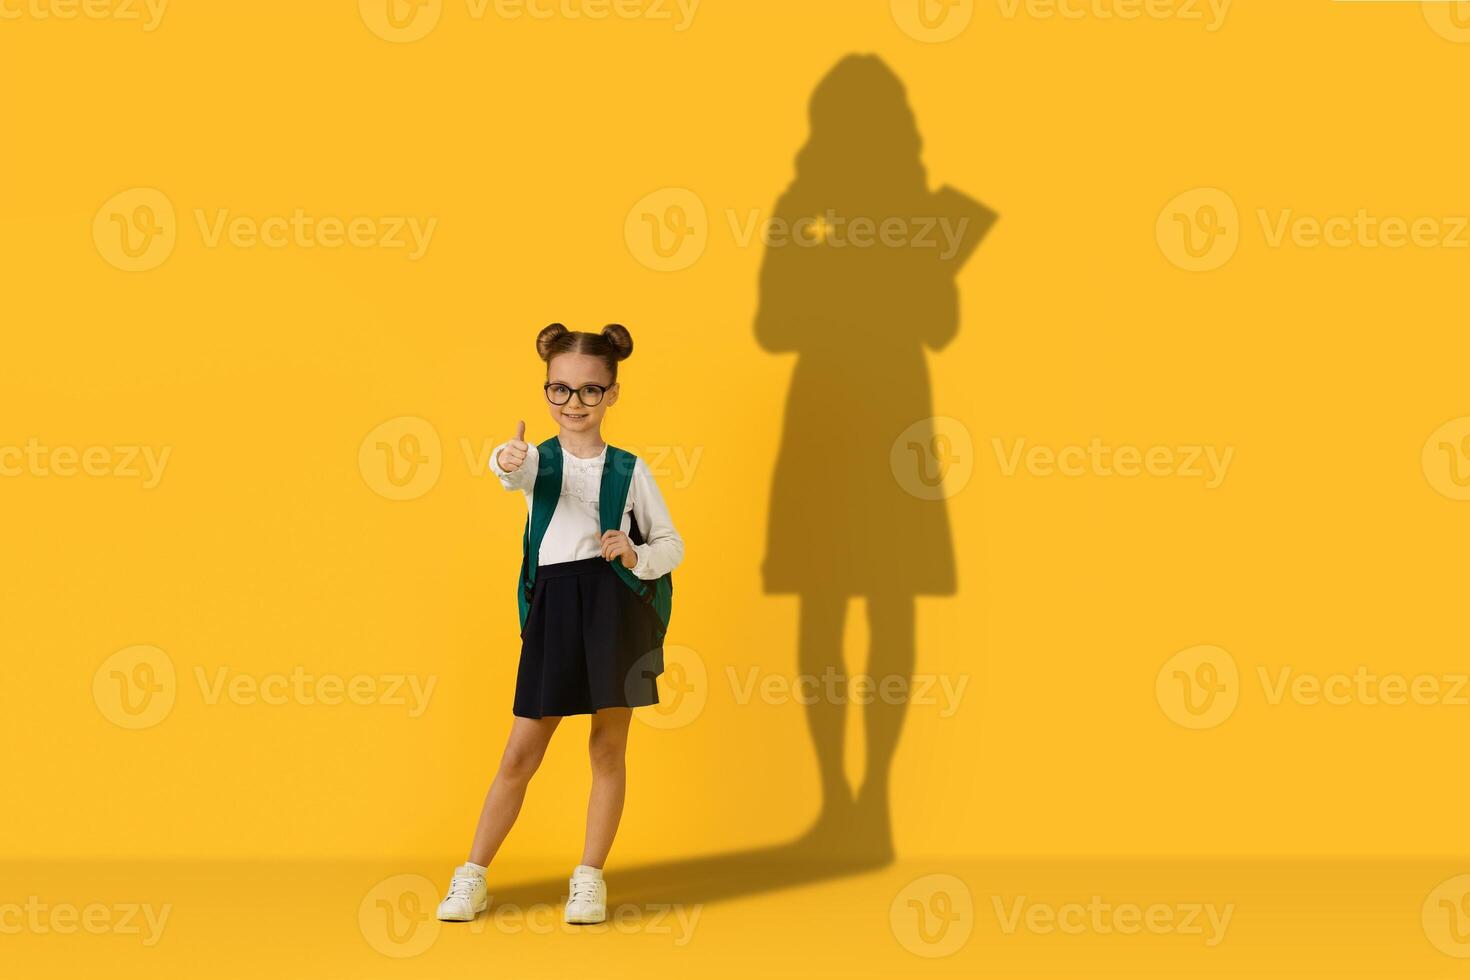 A confident schoolgirl with glasses and hair buns gives a thumbs up while holding a green backpack photo